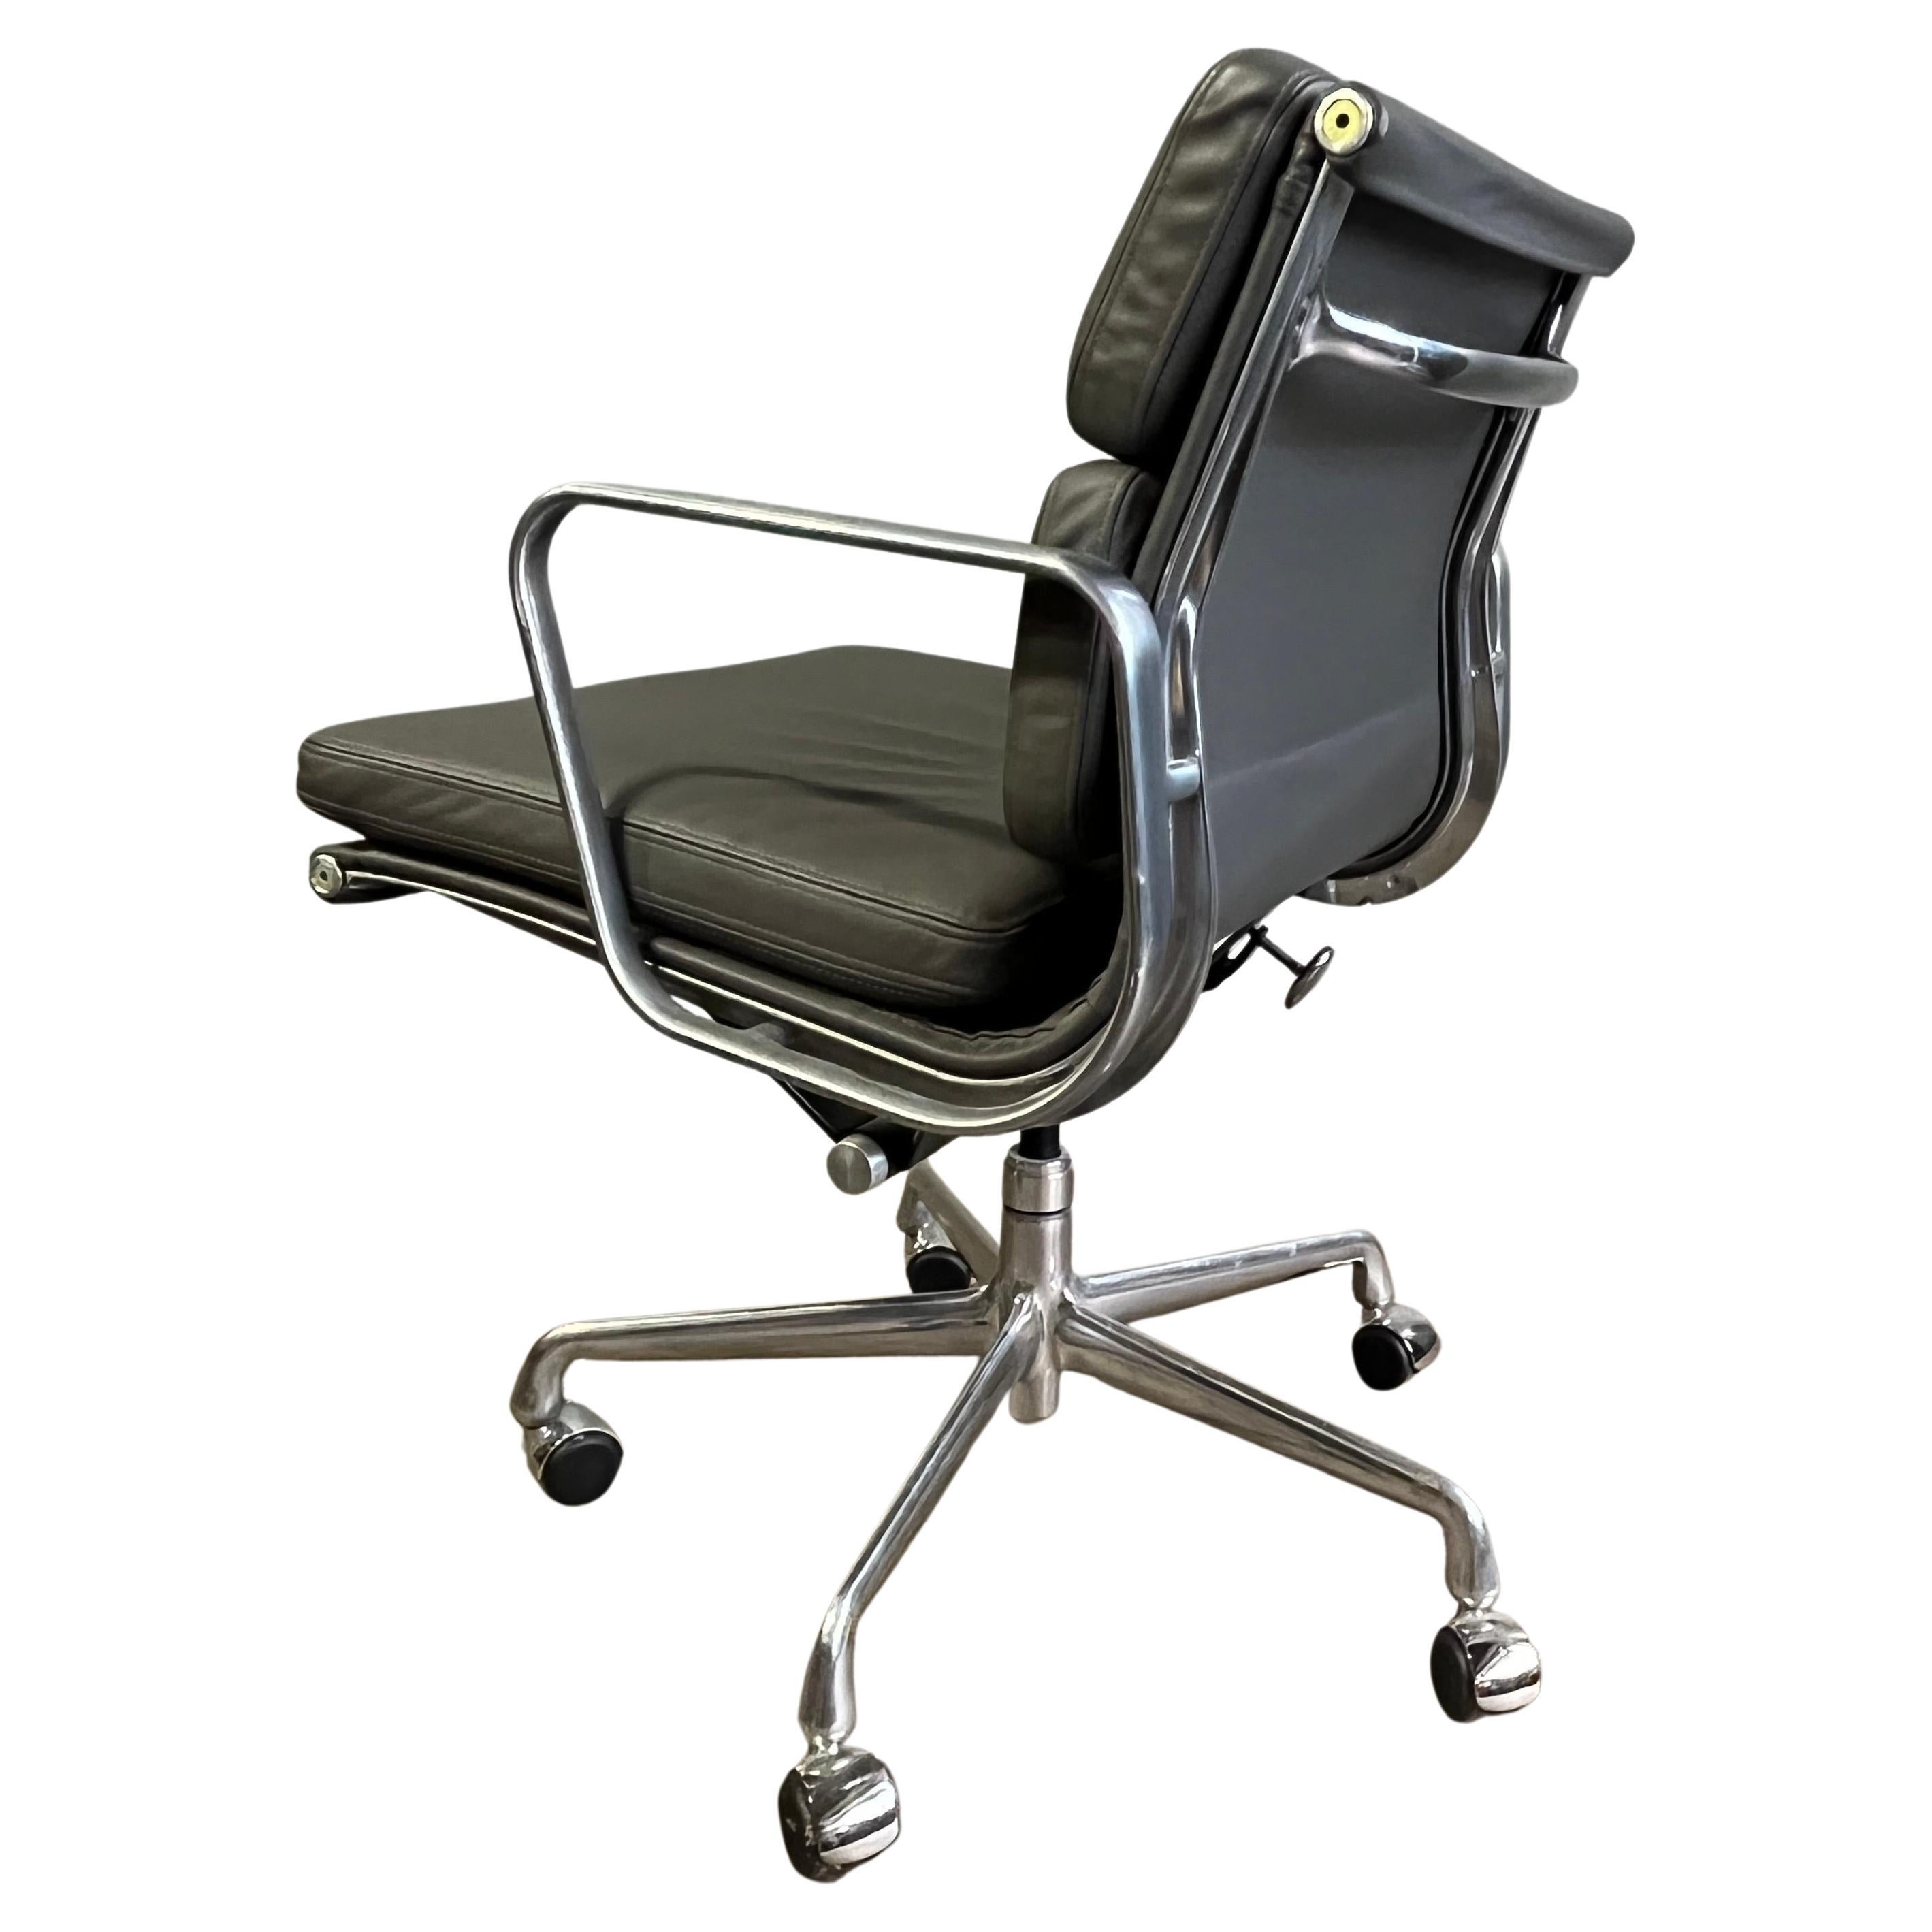 For your consideration is this authentic Eames for Herman Miller vintage soft pad chair in gray leather. Adjustable tilt and height with manual lift. This authentic examples are icons of Mid-Century Modern design. This chair is part of the Eames